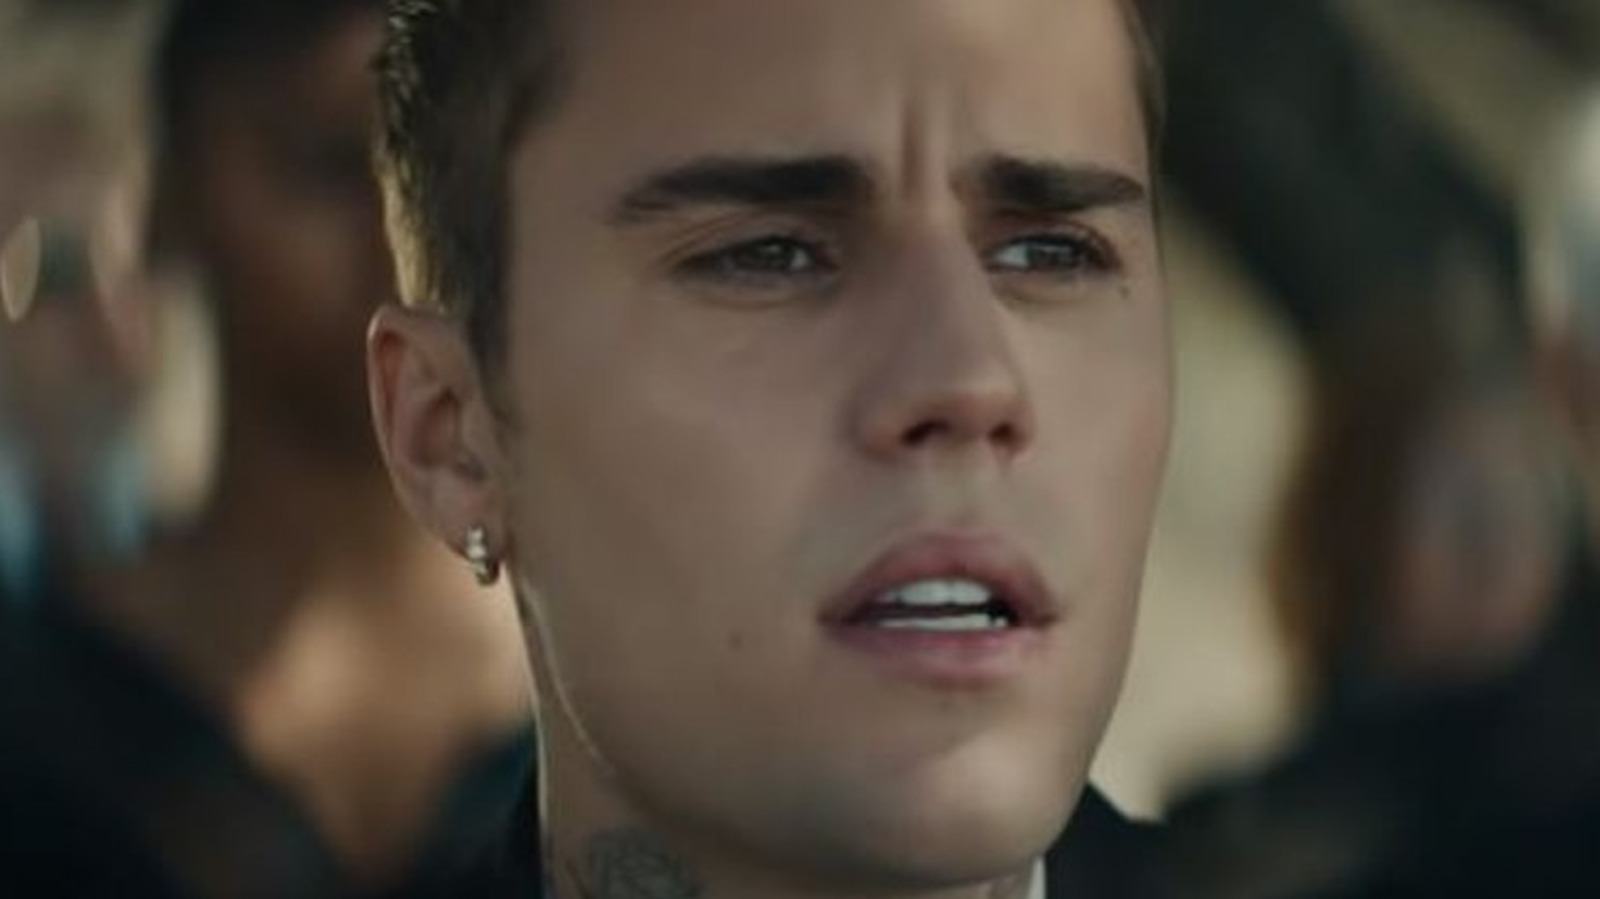 Justin Bieber digs deep in new music video 'GHOST' – The Connector